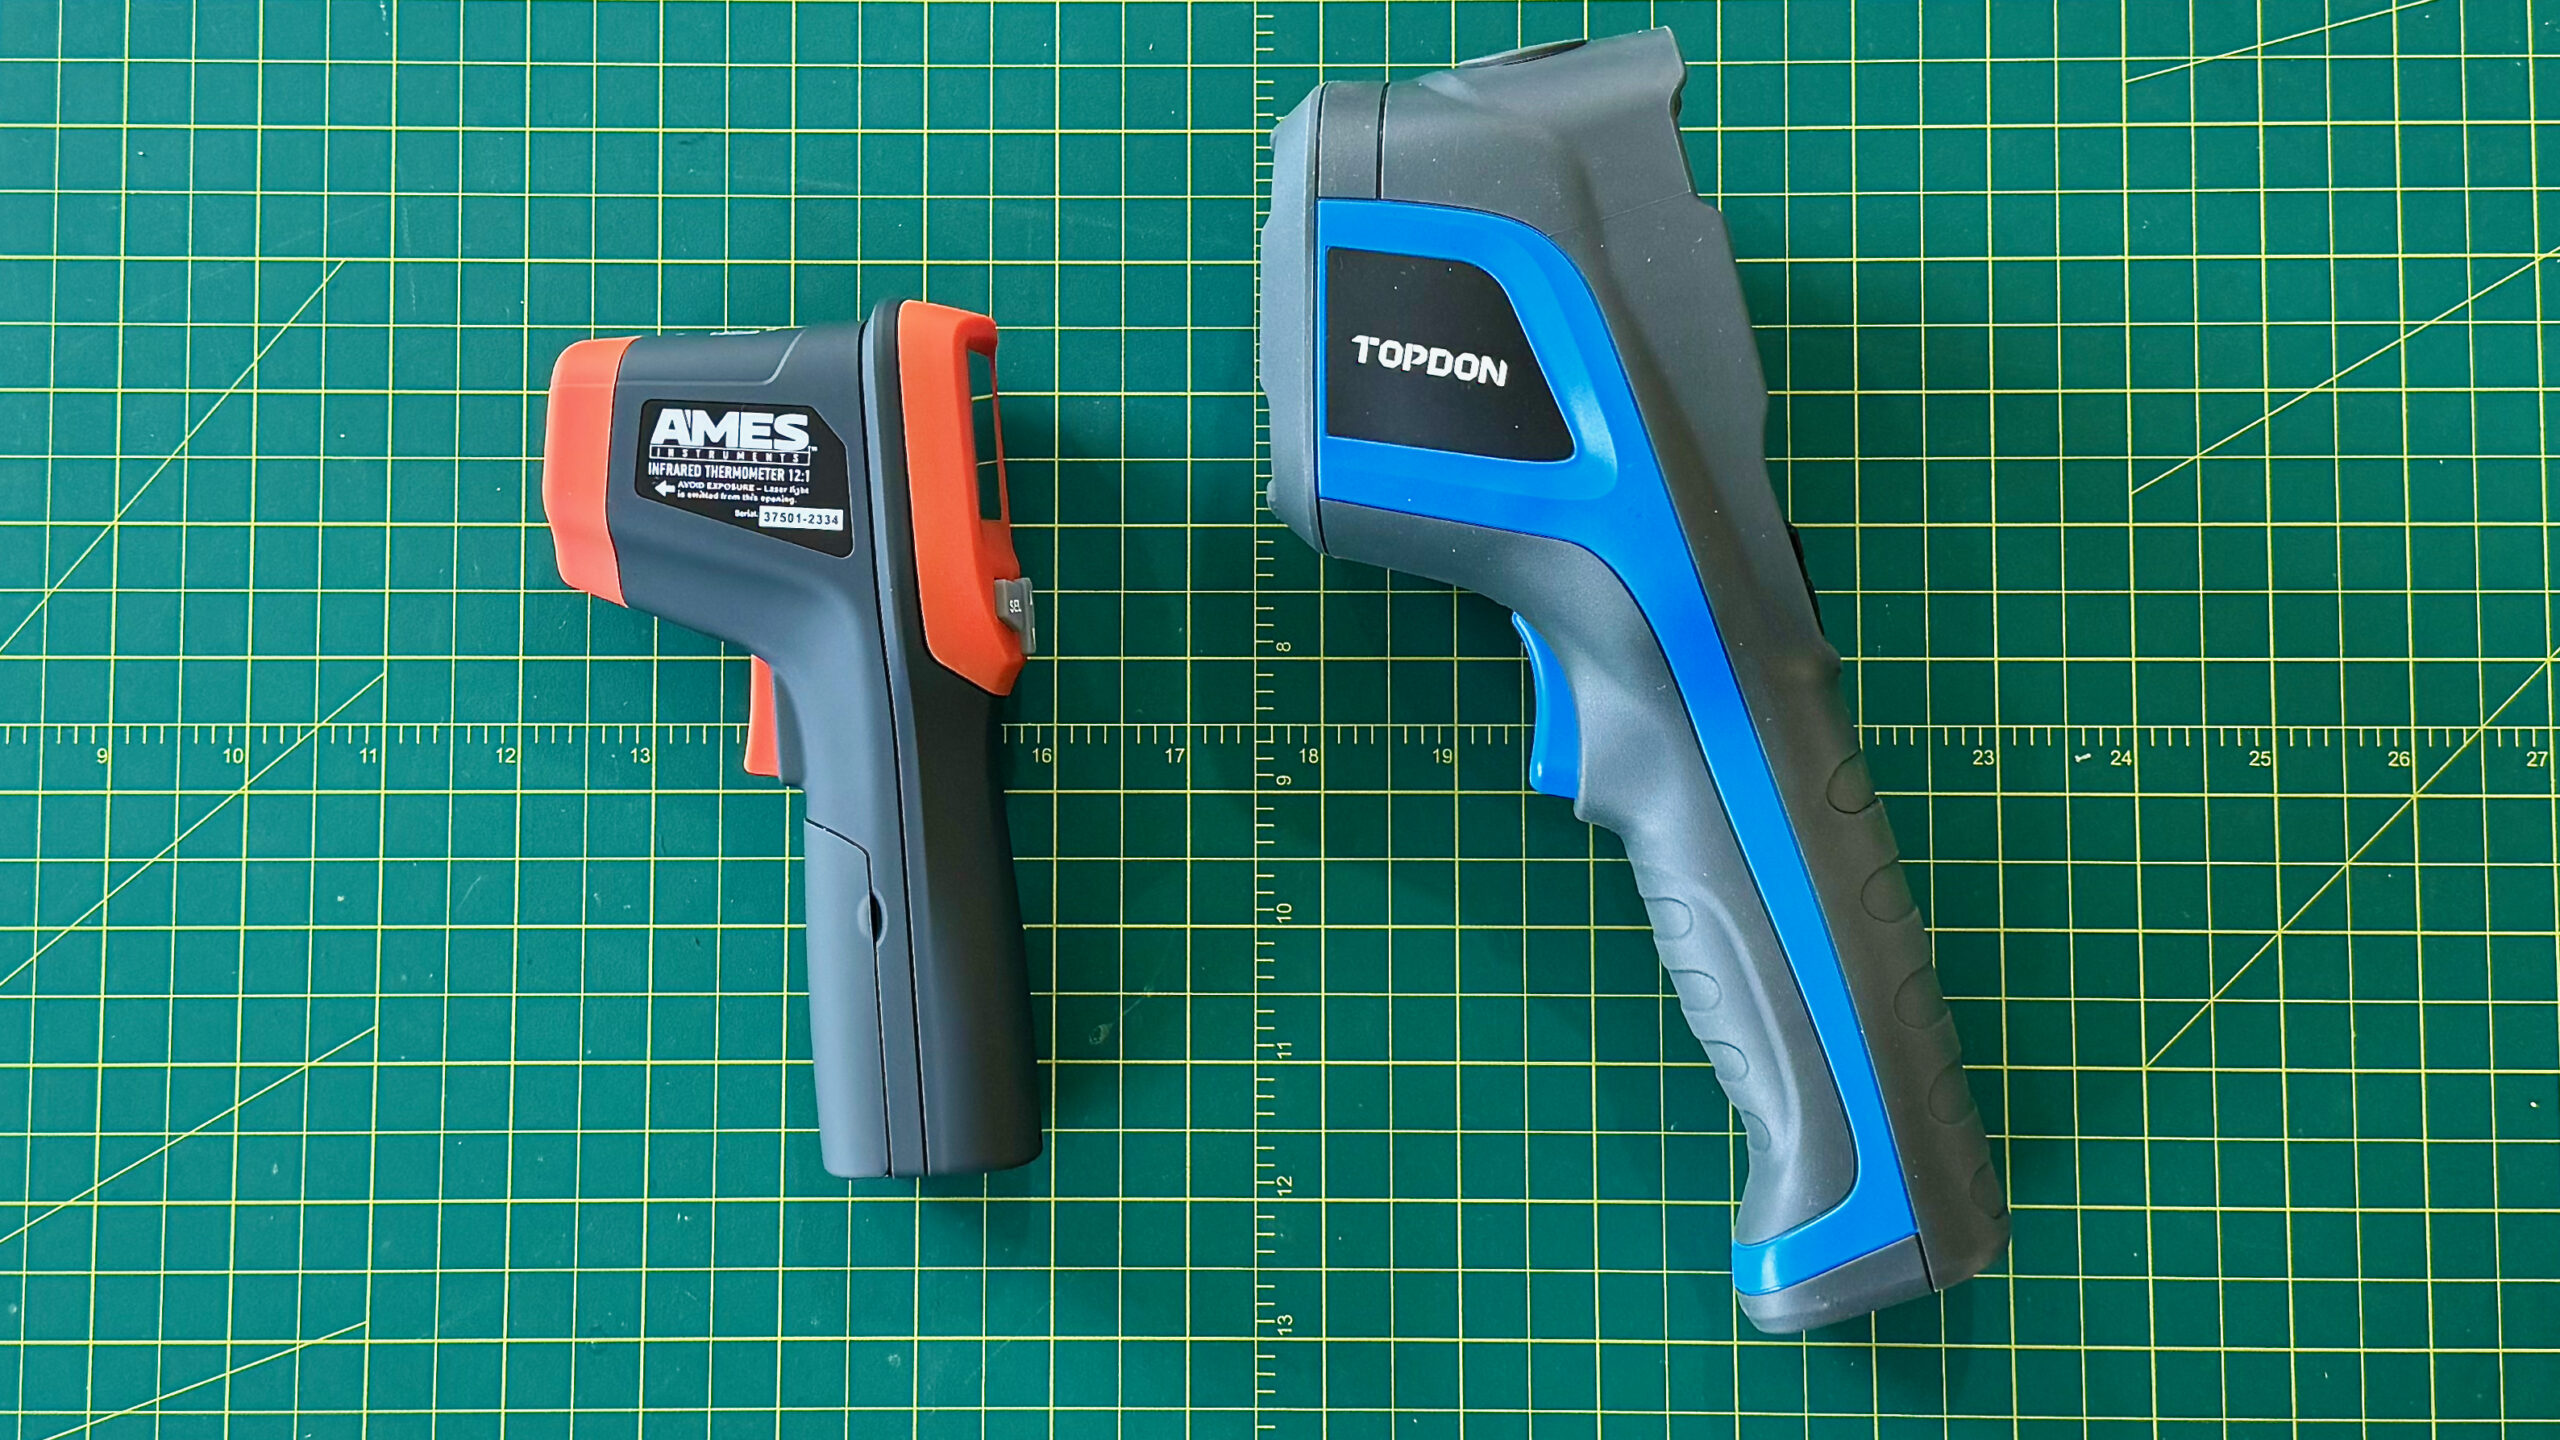 Topdon Thermal Camera vs Infrared thermometer